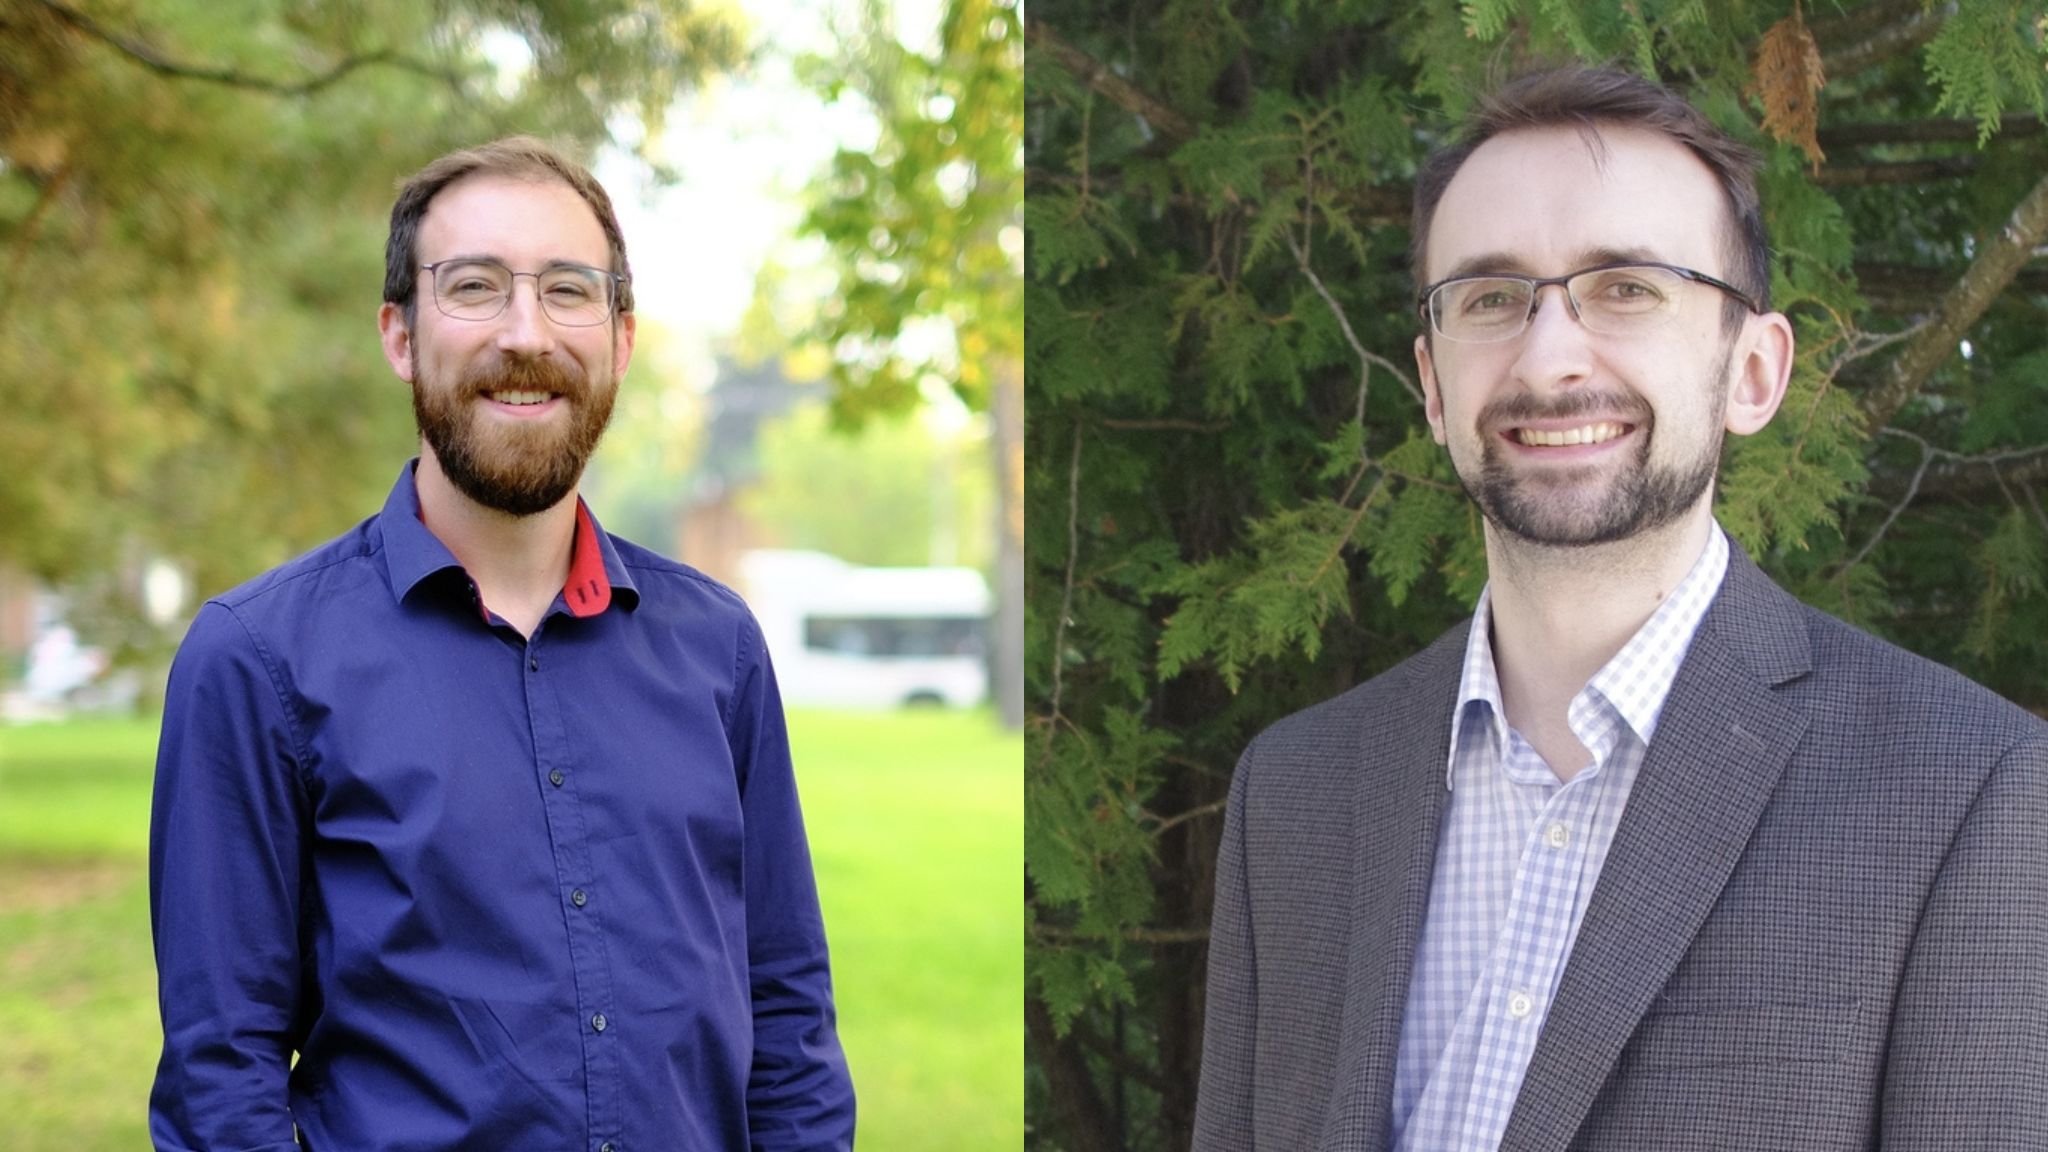 Two photos featuring headshots of scholars against green backgrounds side by side. The first headshot features a white man with a beard and glasses, wearing a blue button-up shirt smiling in front of a green clearing. The second headshot features a white man man with a beard and glasses wearing a suit jacket and button up shirt, who is smiling andstanding in front of a hedge. 